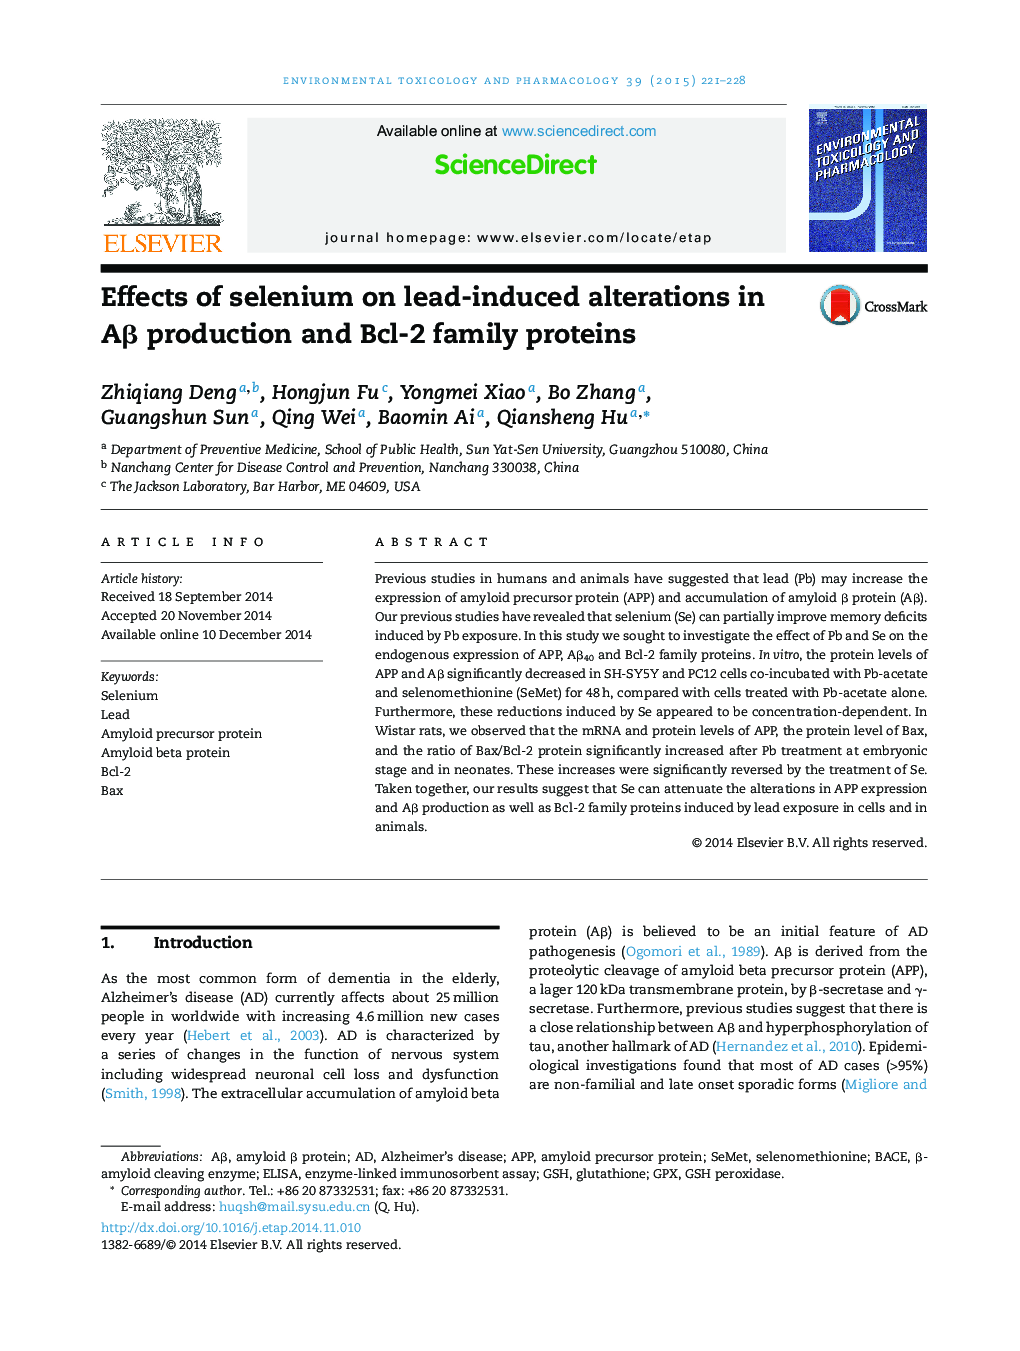 Effects of selenium on lead-induced alterations in Aβ production and Bcl-2 family proteins